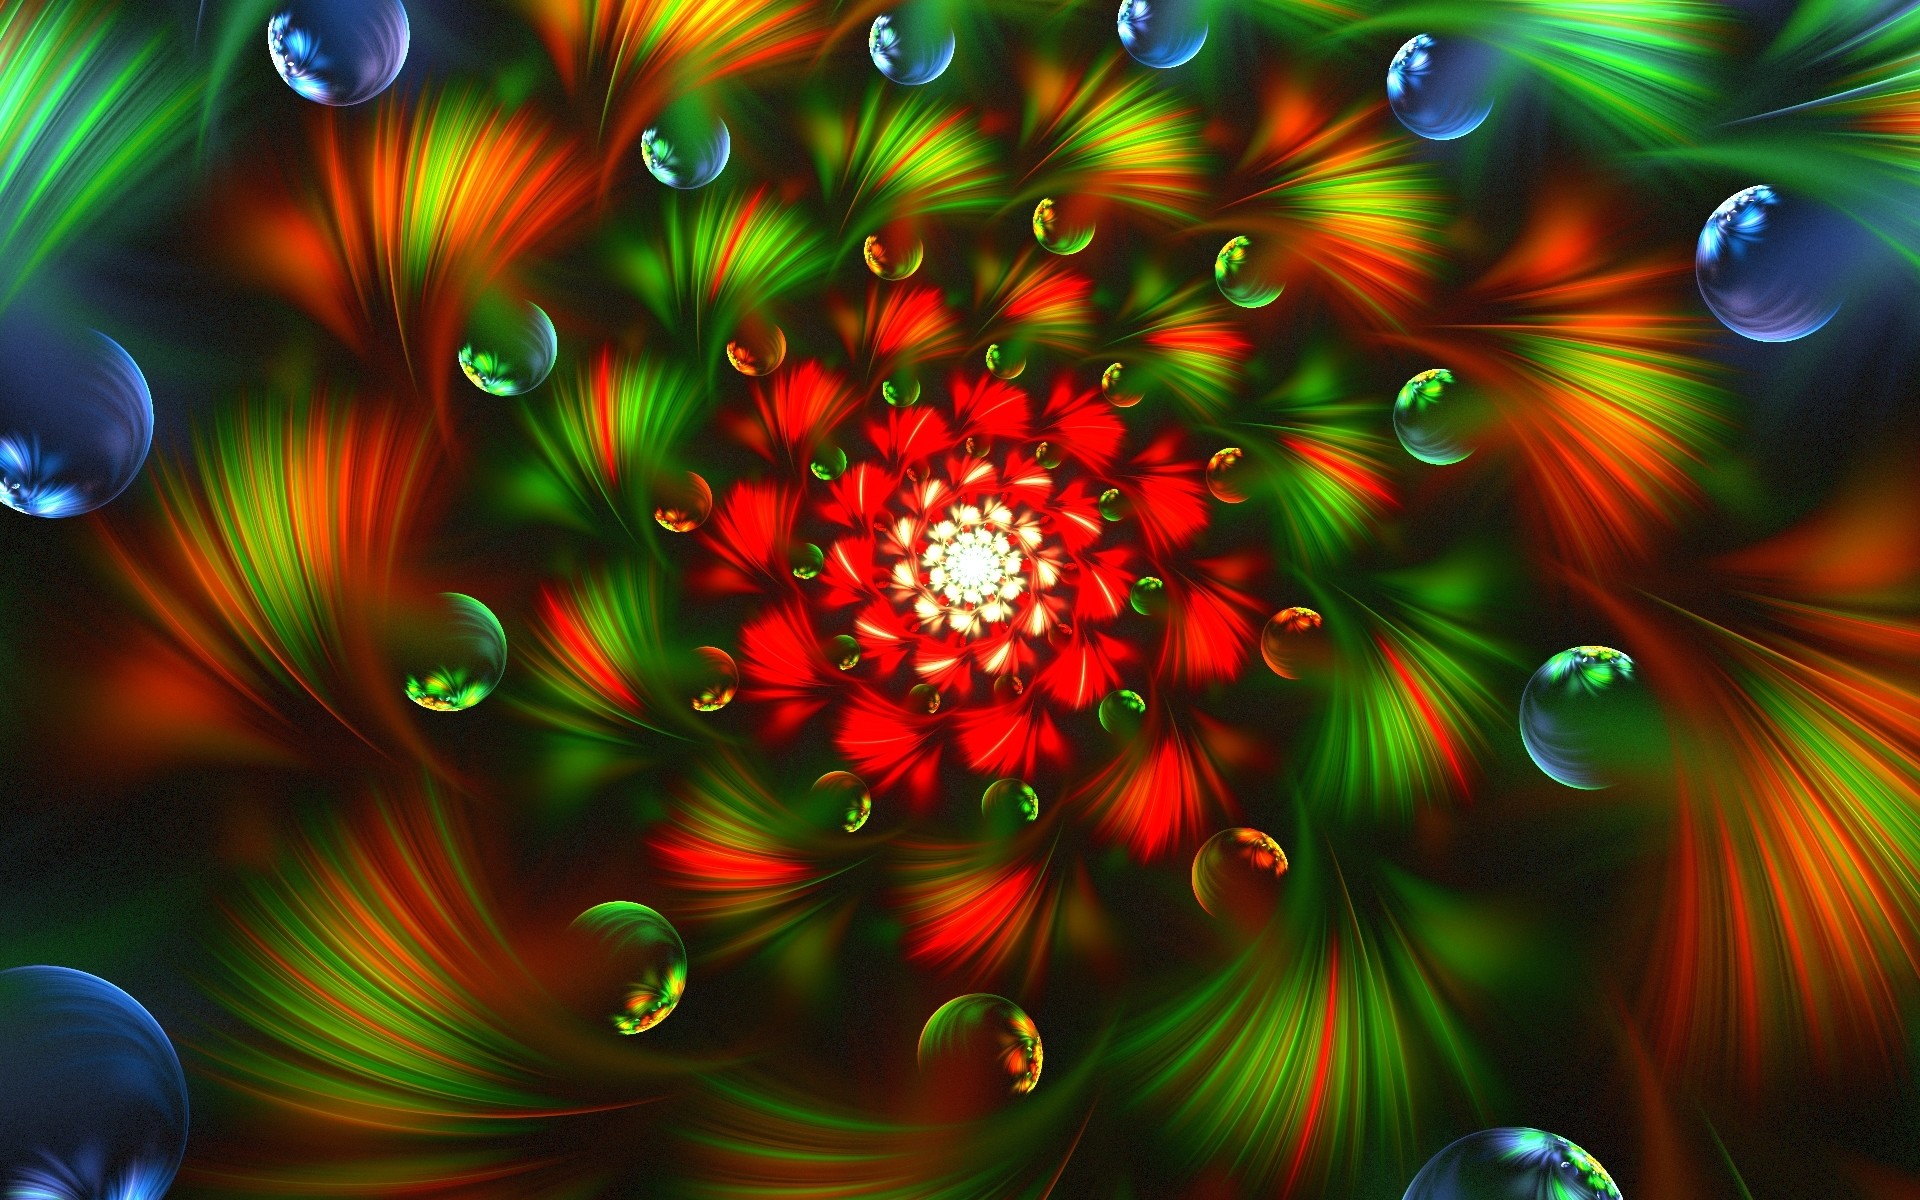 1920x1200 3d Colorful Apples Art Wallpaper 3d Abstract Fractal Colorful Bright Hd  Wallpaper